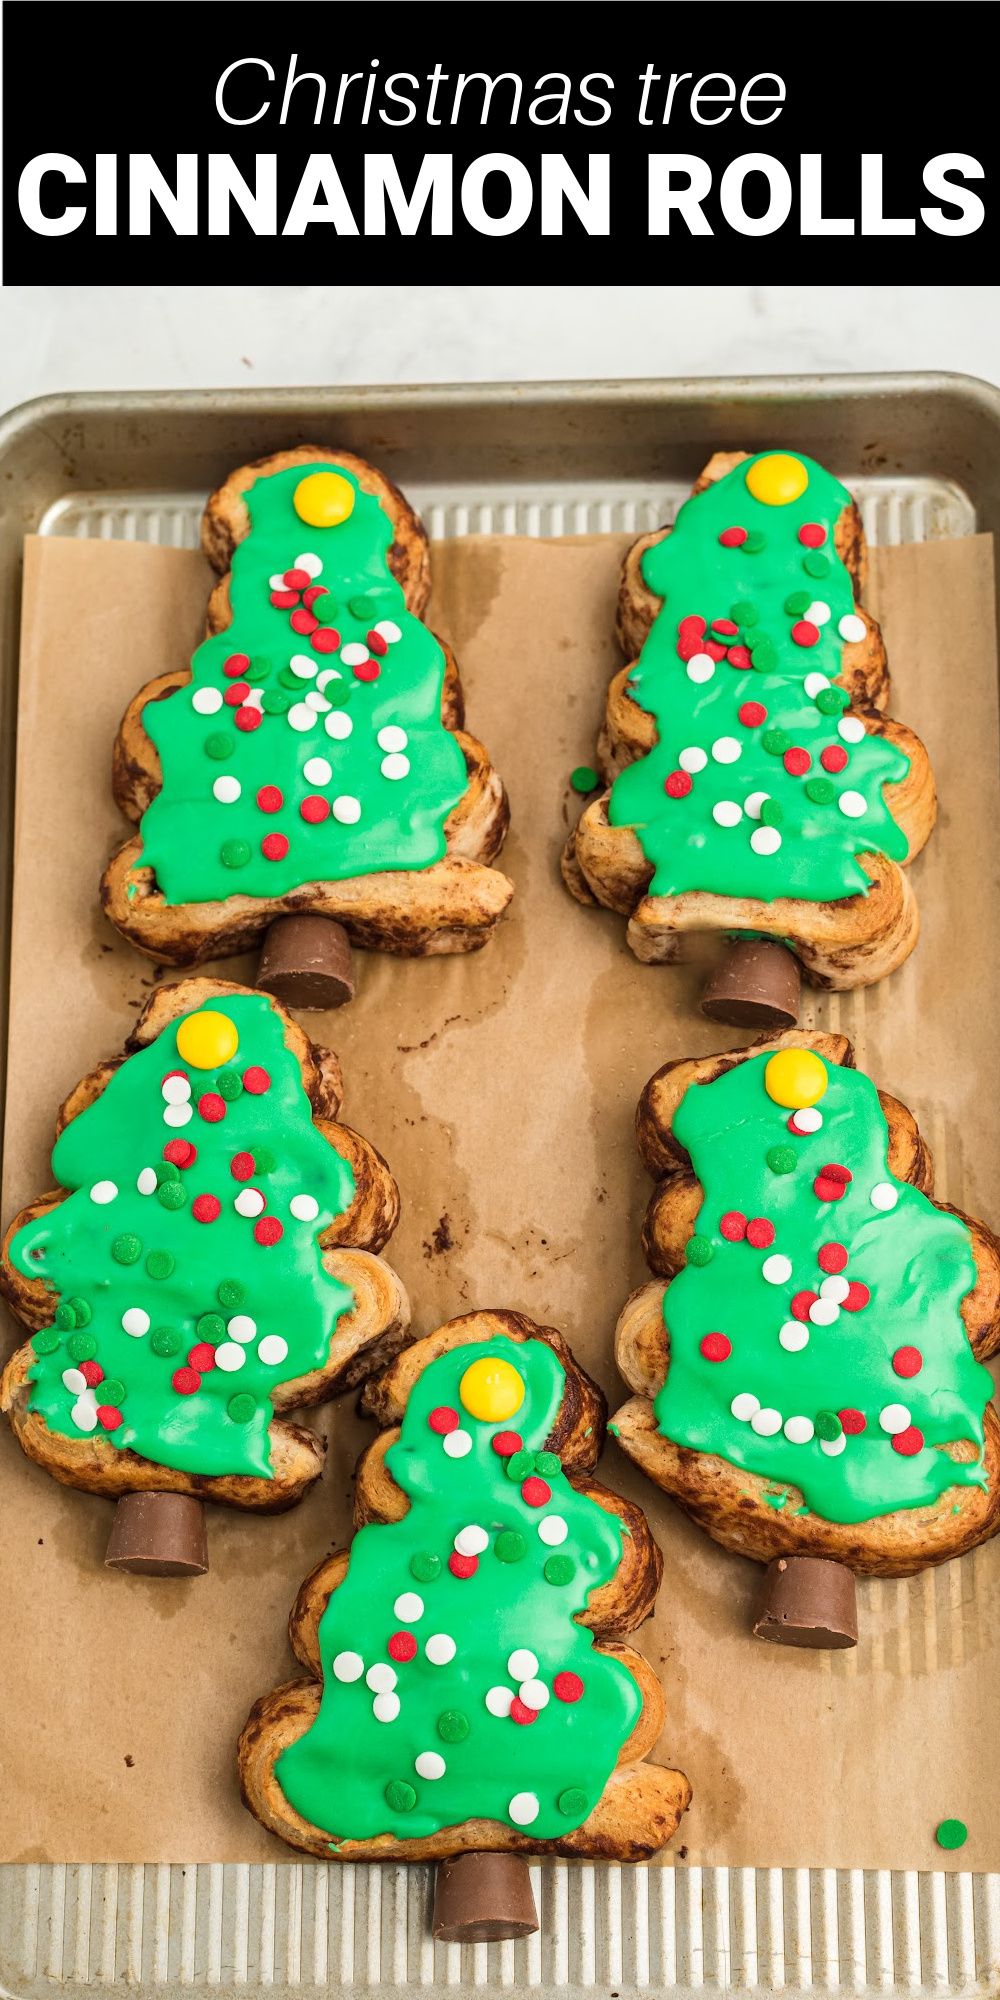 Surprise your family this holiday season when you take ordinary cinnamon rolls to a whole new level with these festive Christmas Tree Cinnamon Rolls. They are super easy to make, and the kids will just love them.